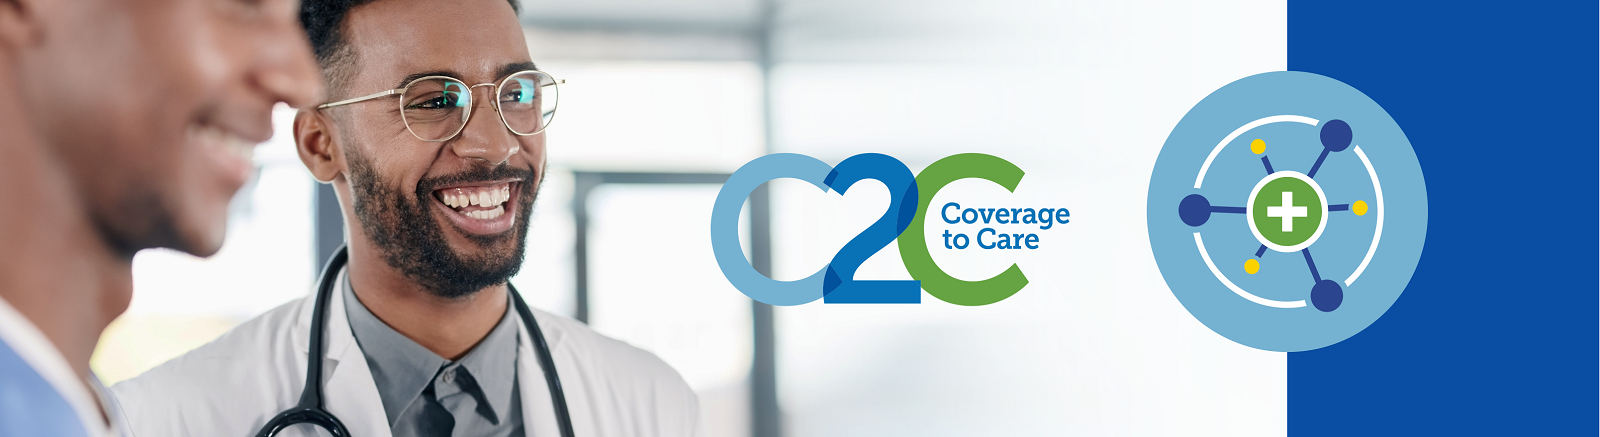 Male doctor smiling next to the C2C logo